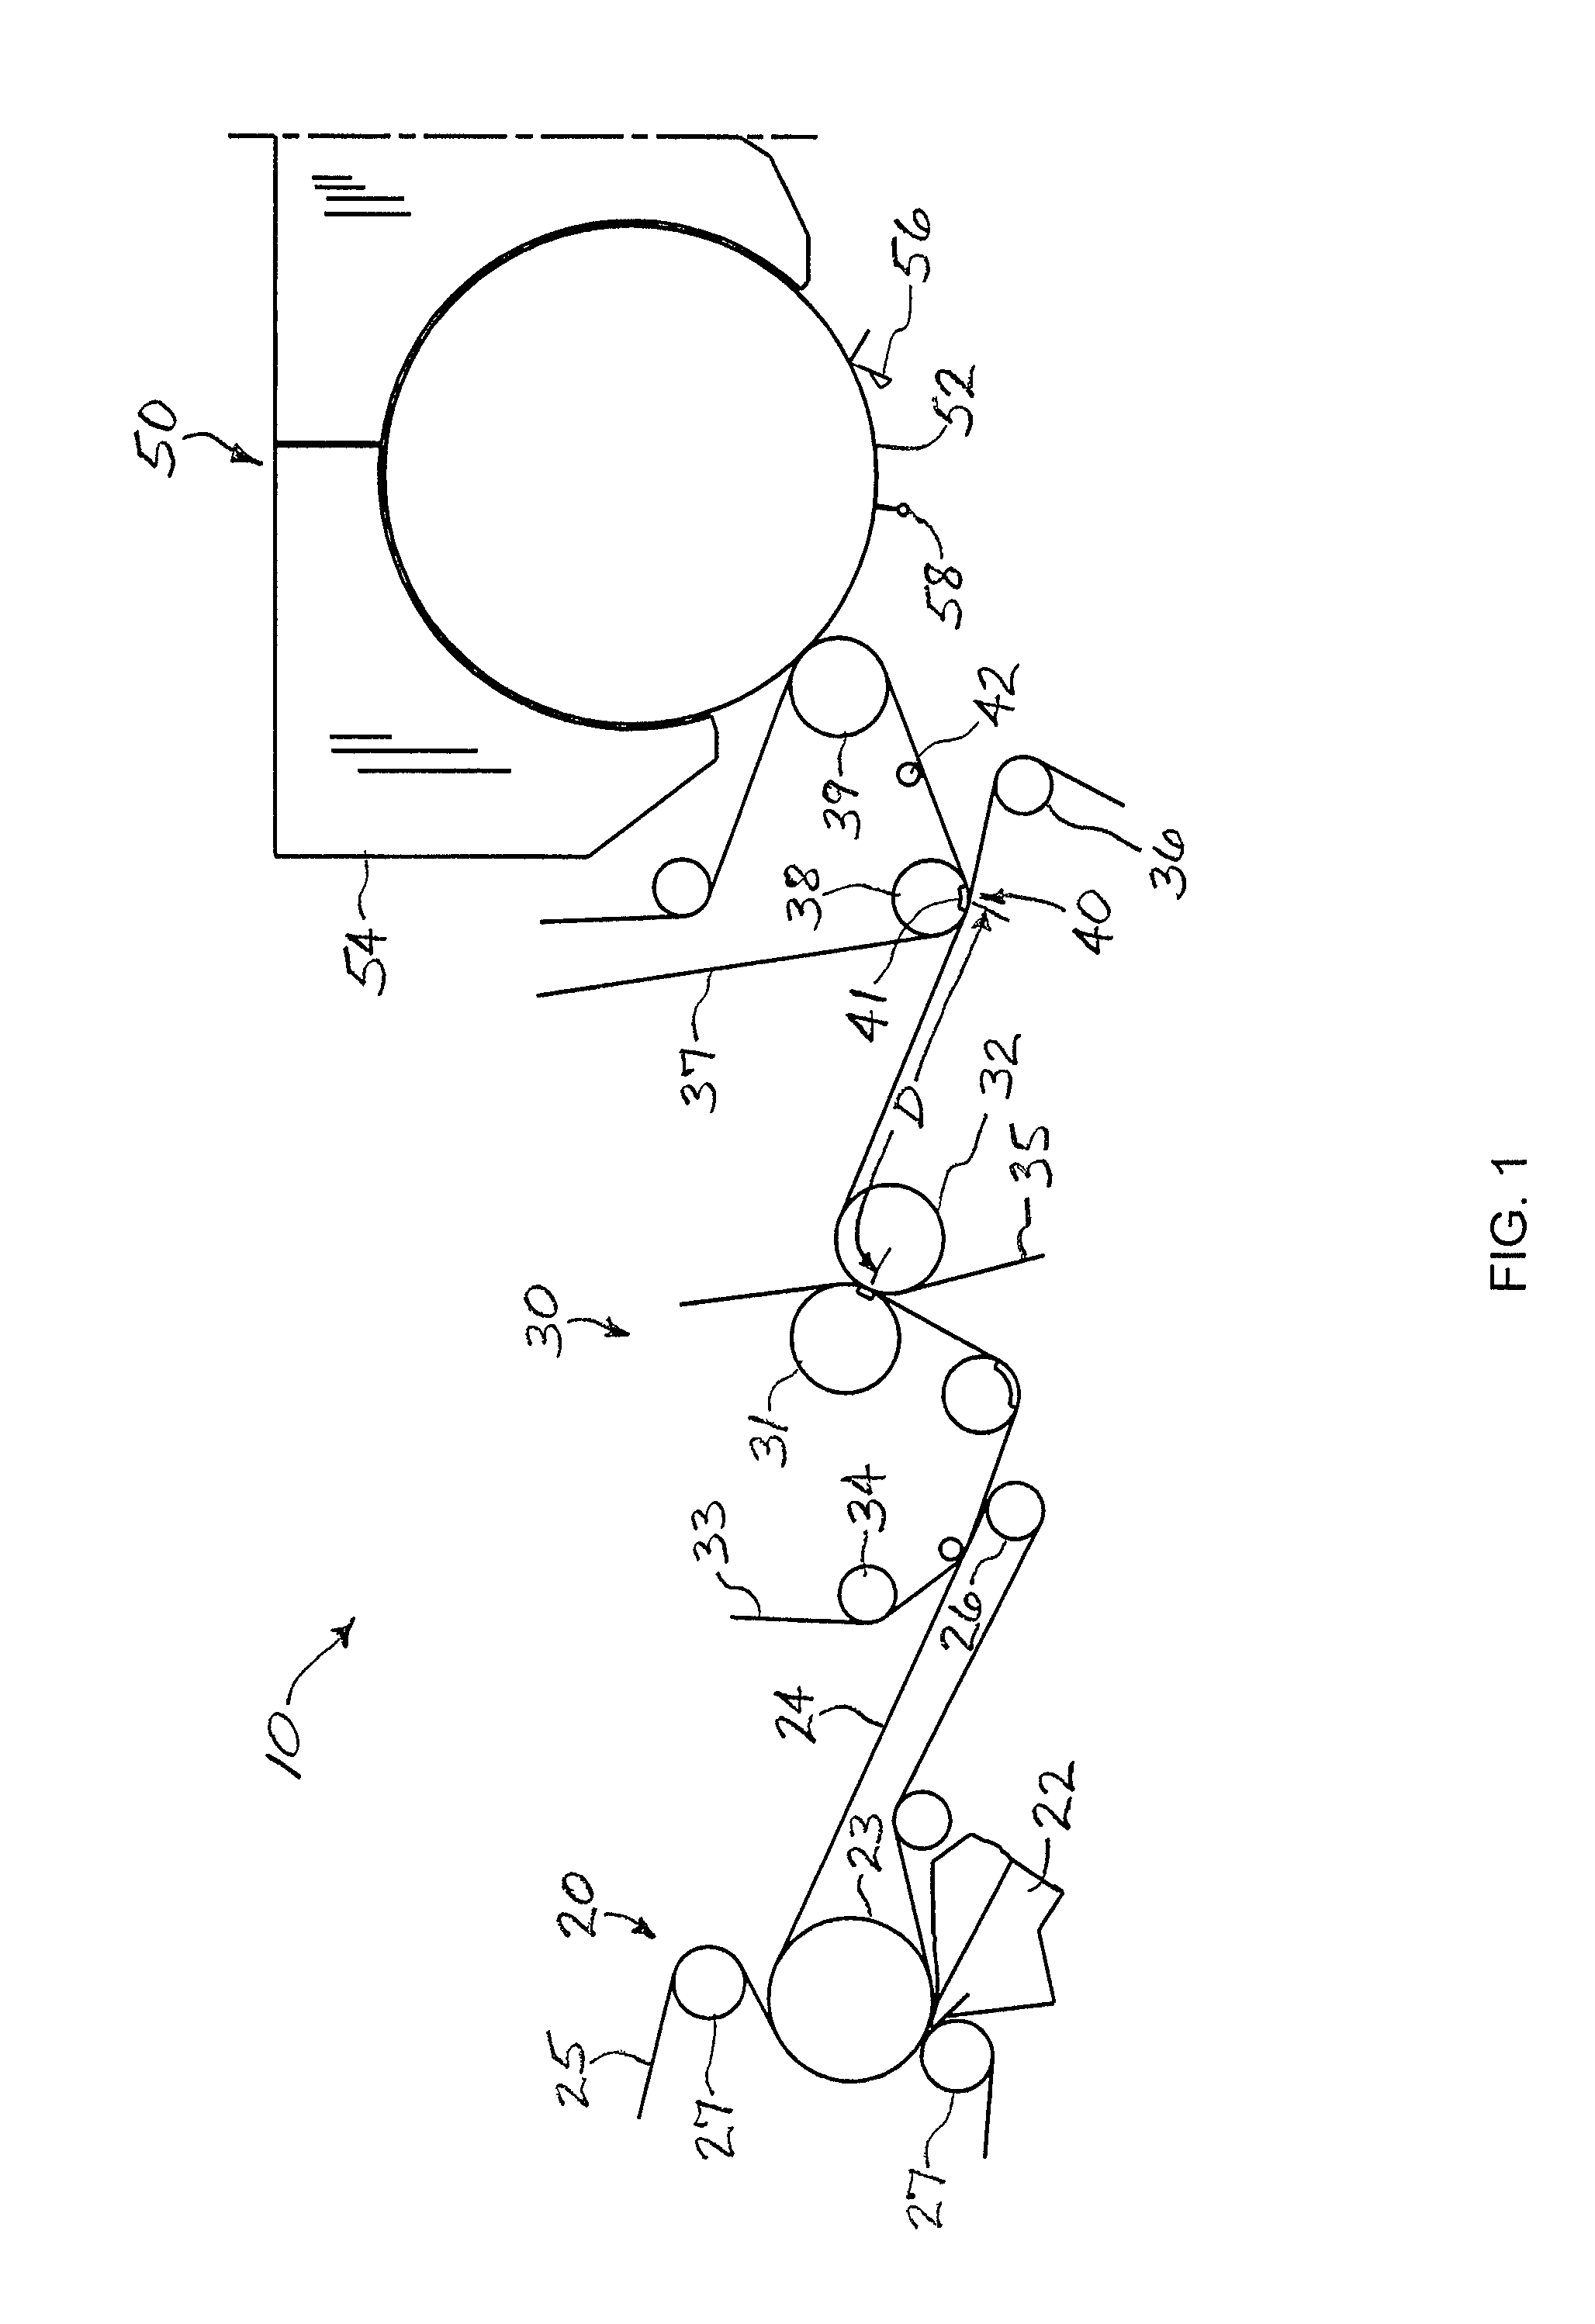 Papermaking machine employing an impermeable transfer belt, and associated methods